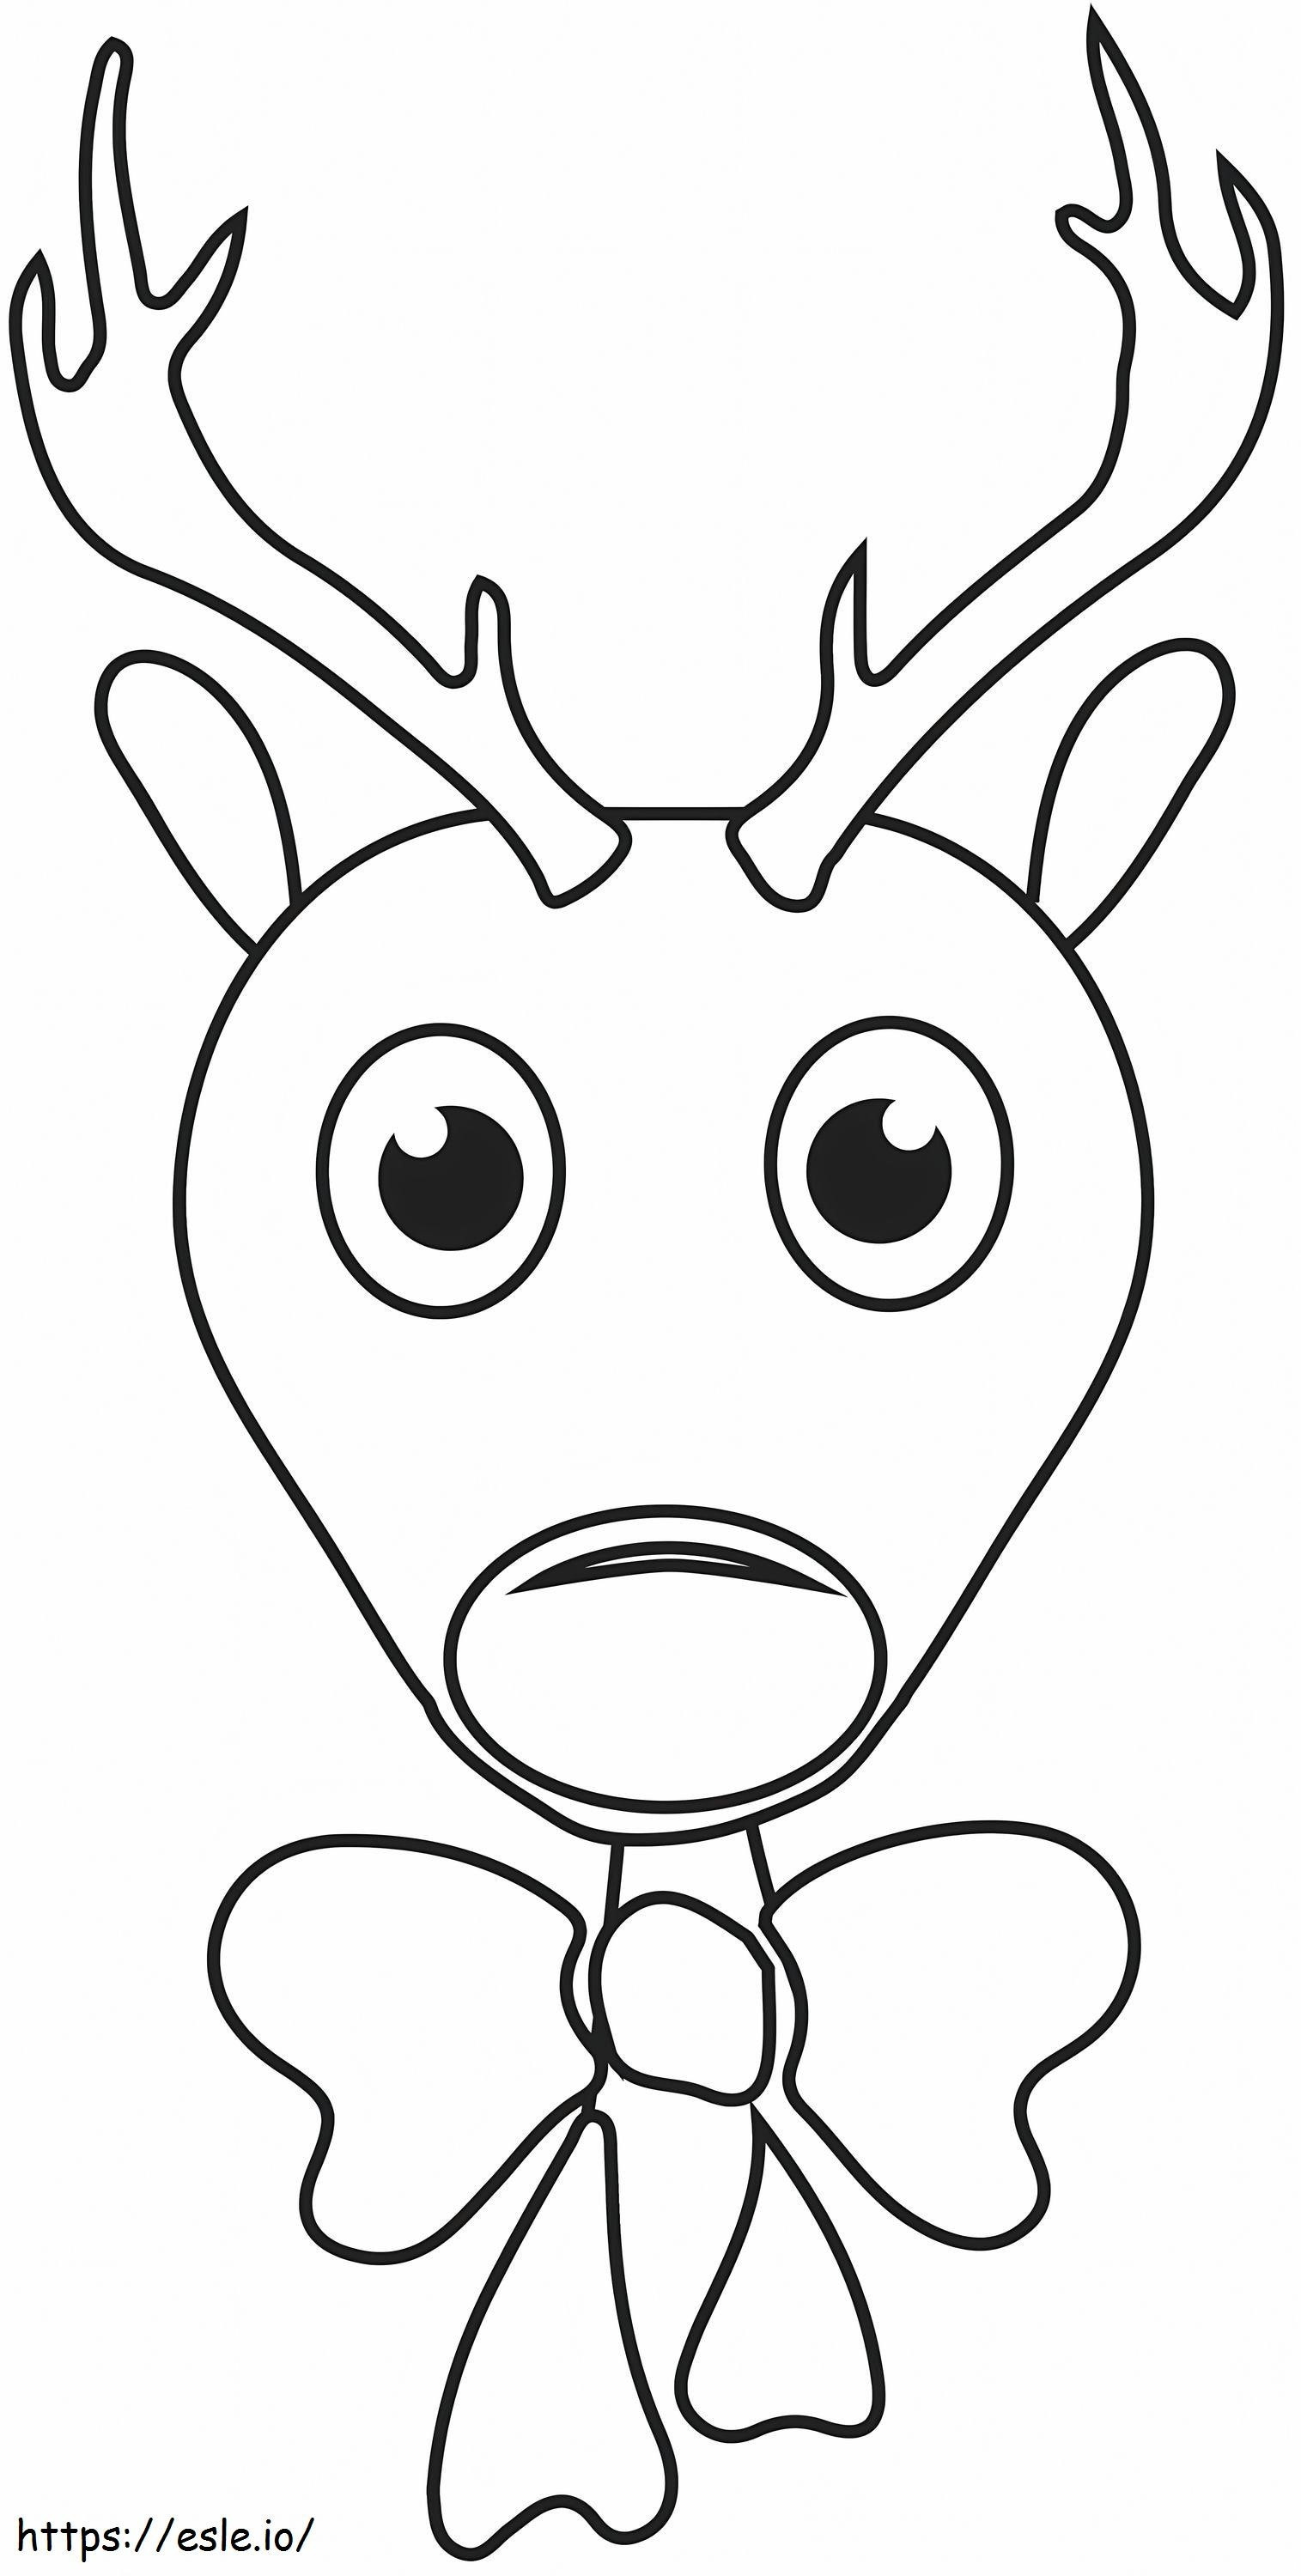 Rudolph Head coloring page